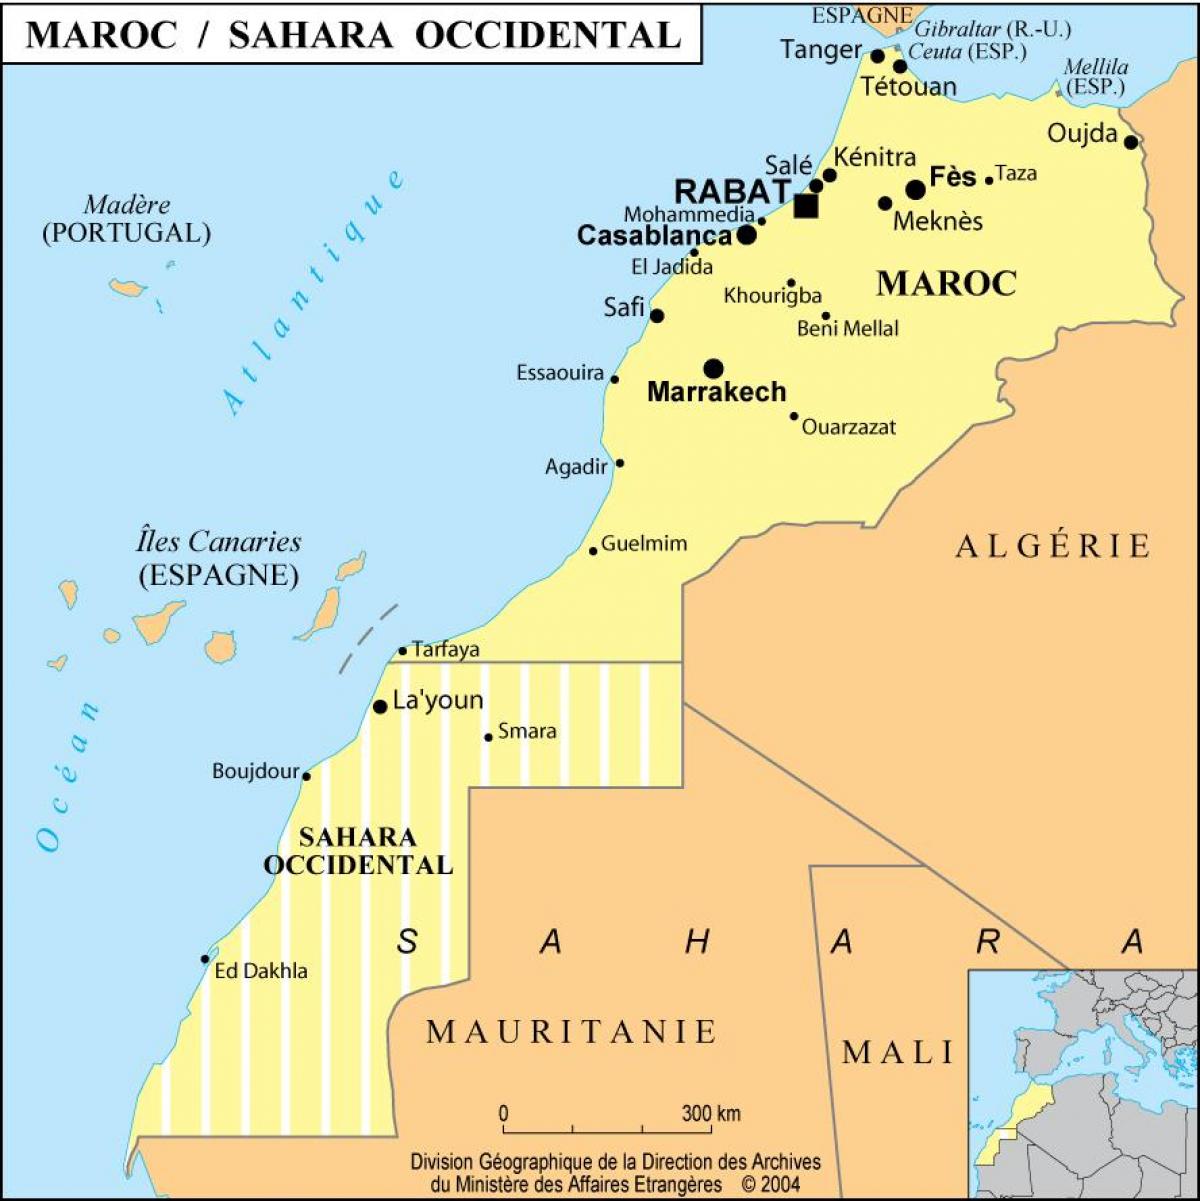 Map of Morocco with main cities